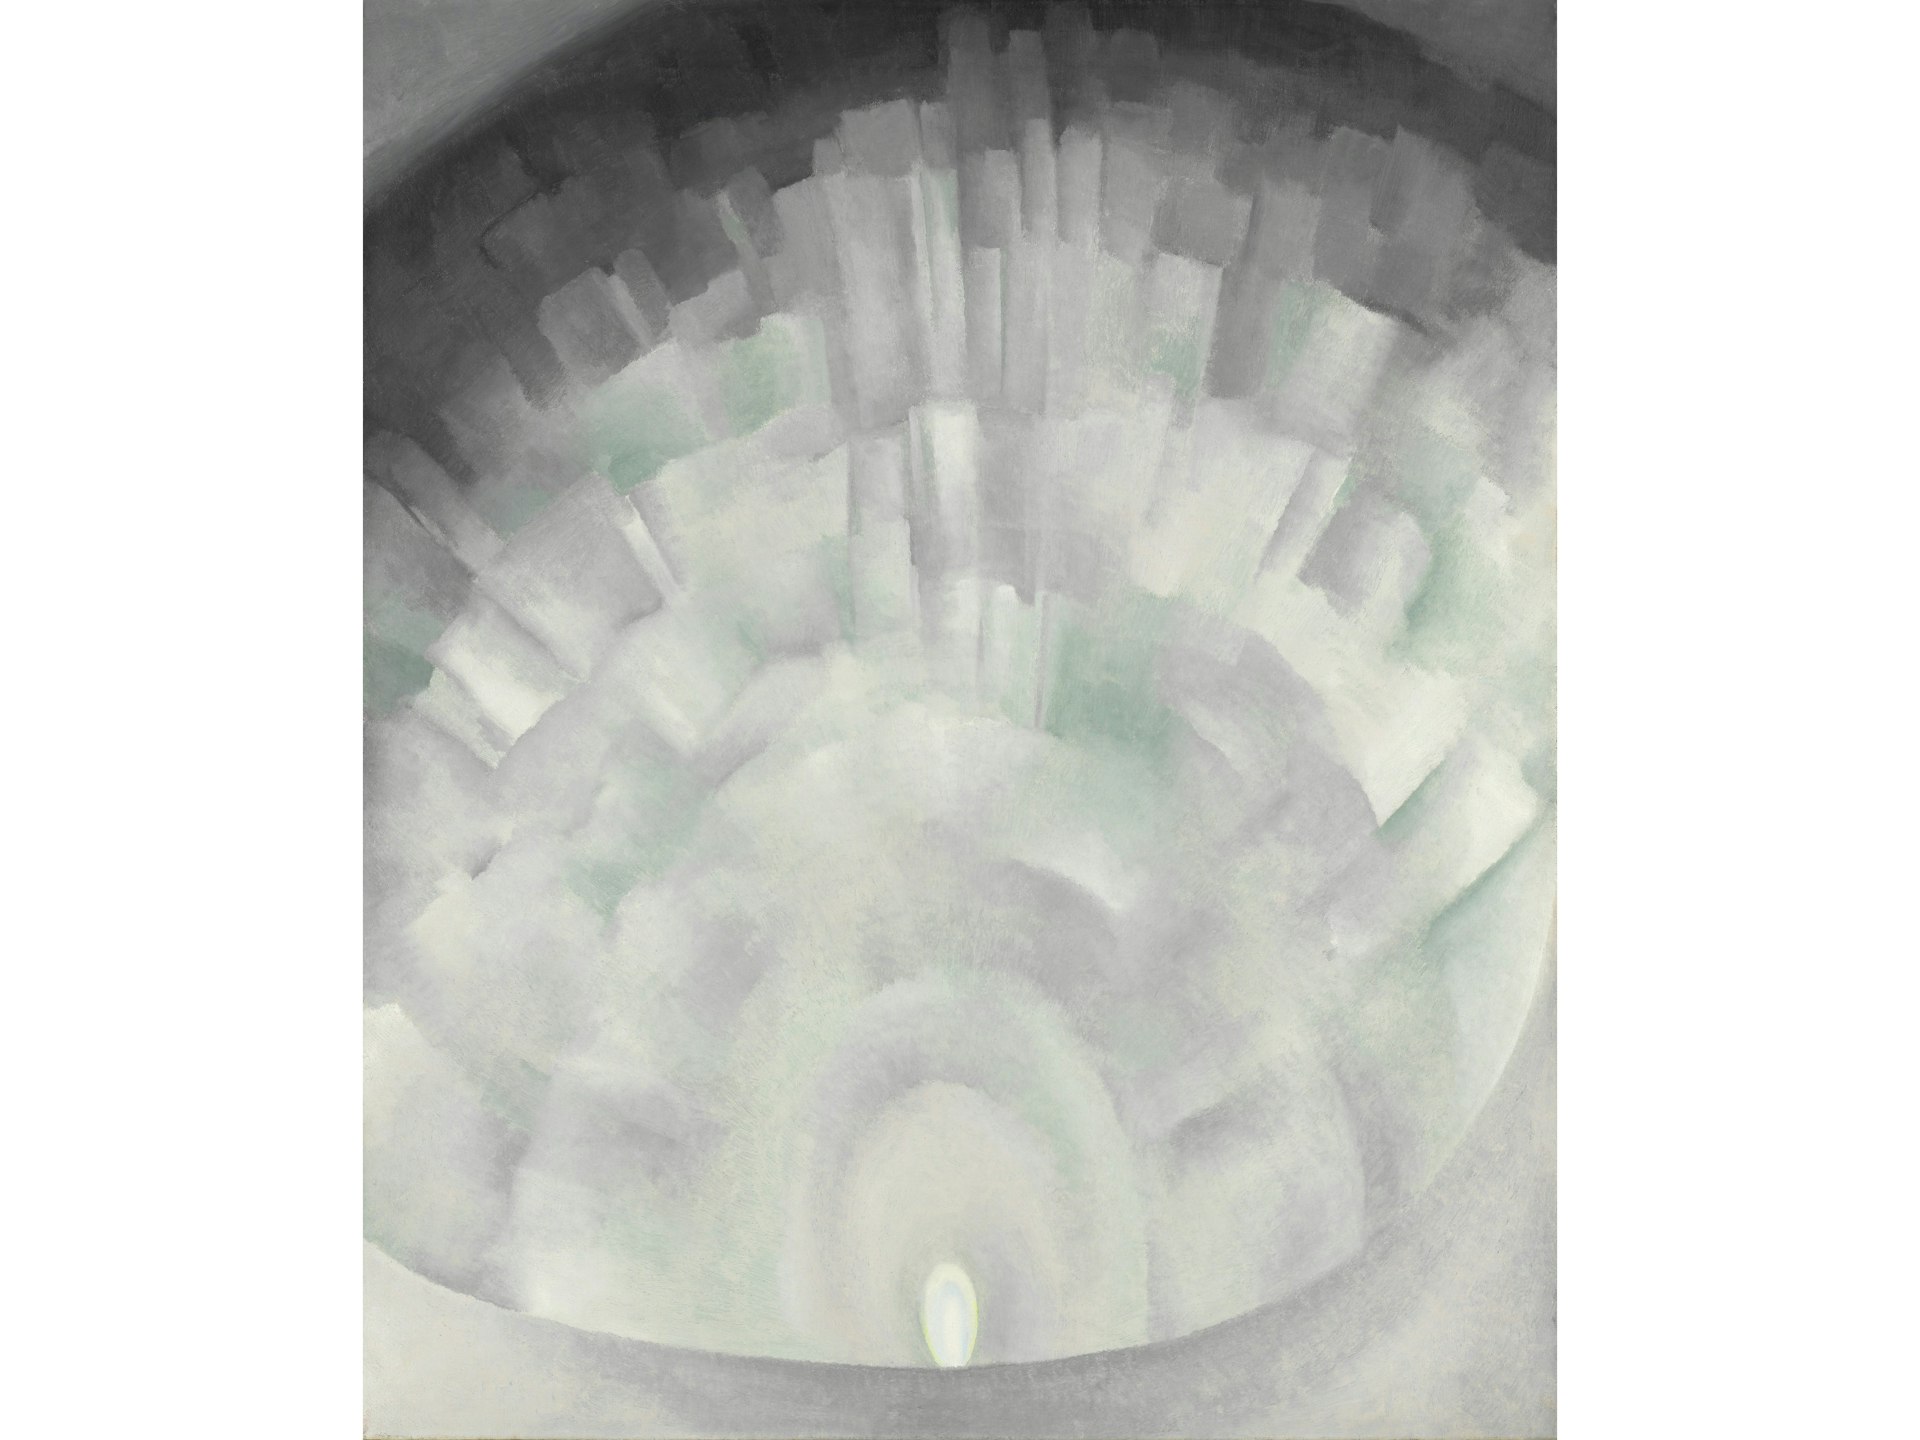 Georgia O’Keeffe's work “Ballet Skirt or Electric Light (from the White Rose Motif)” (1927)